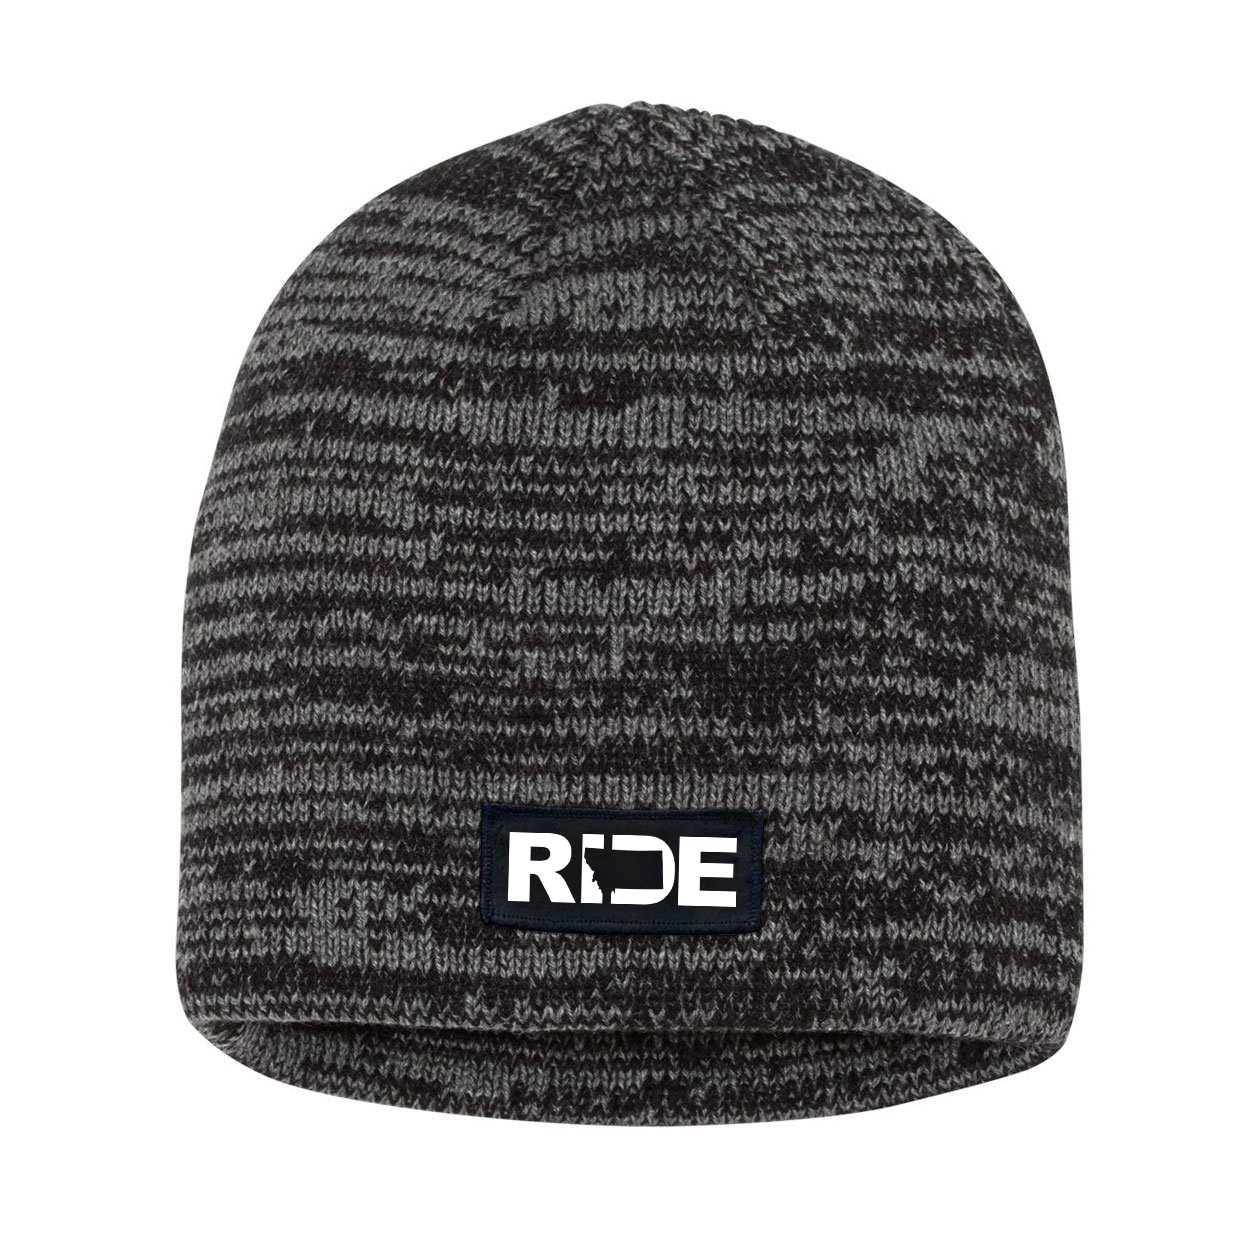 Ride Montana Night Out Woven Patch Skully Marled Knit Beanie Black/Gray (White Logo)